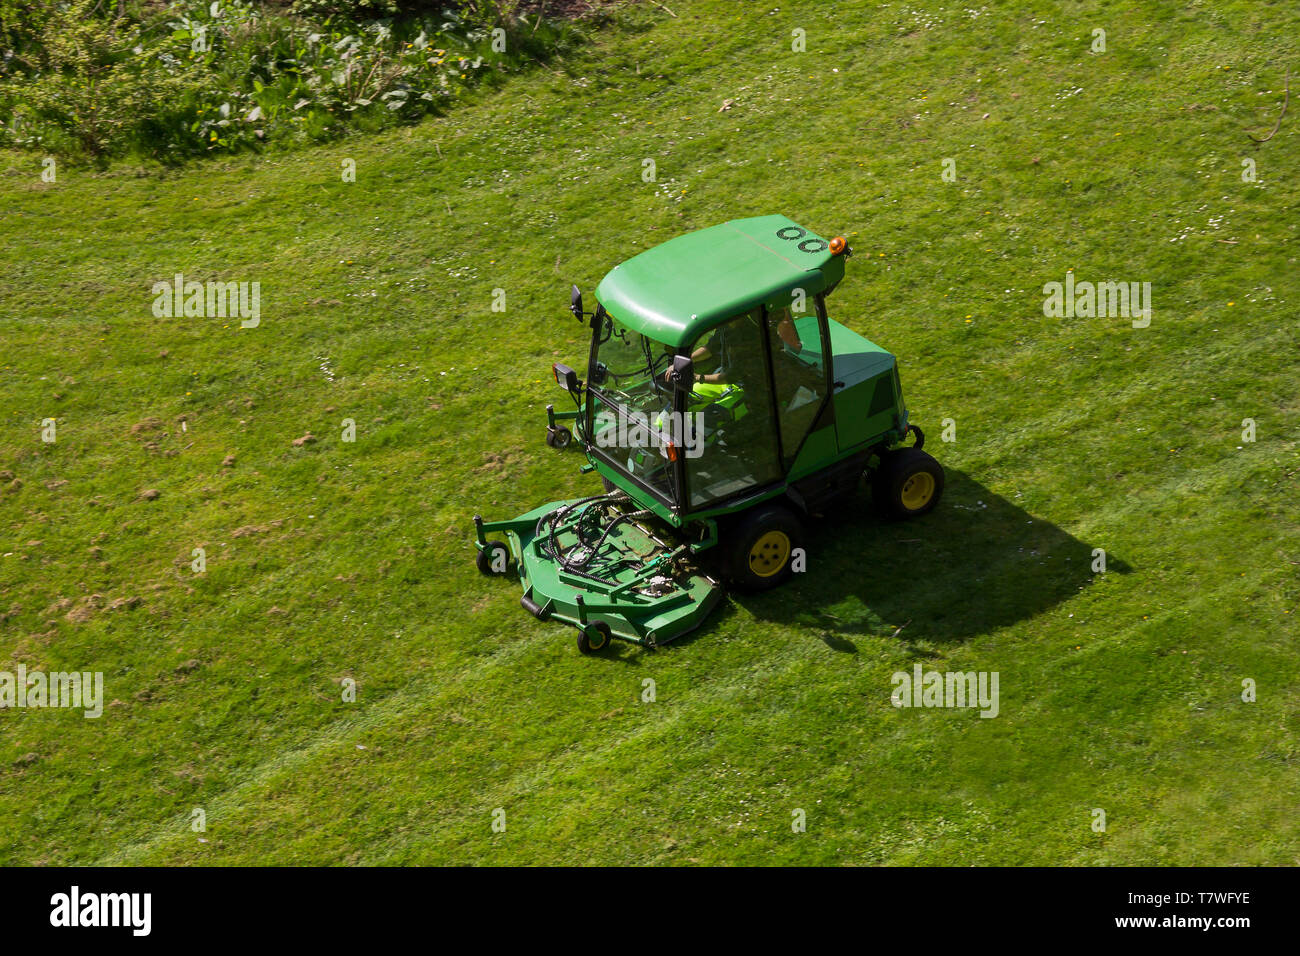 A riding commercial landscaper of a community or city services on the big lawn mower cutting the grass Stock Photo